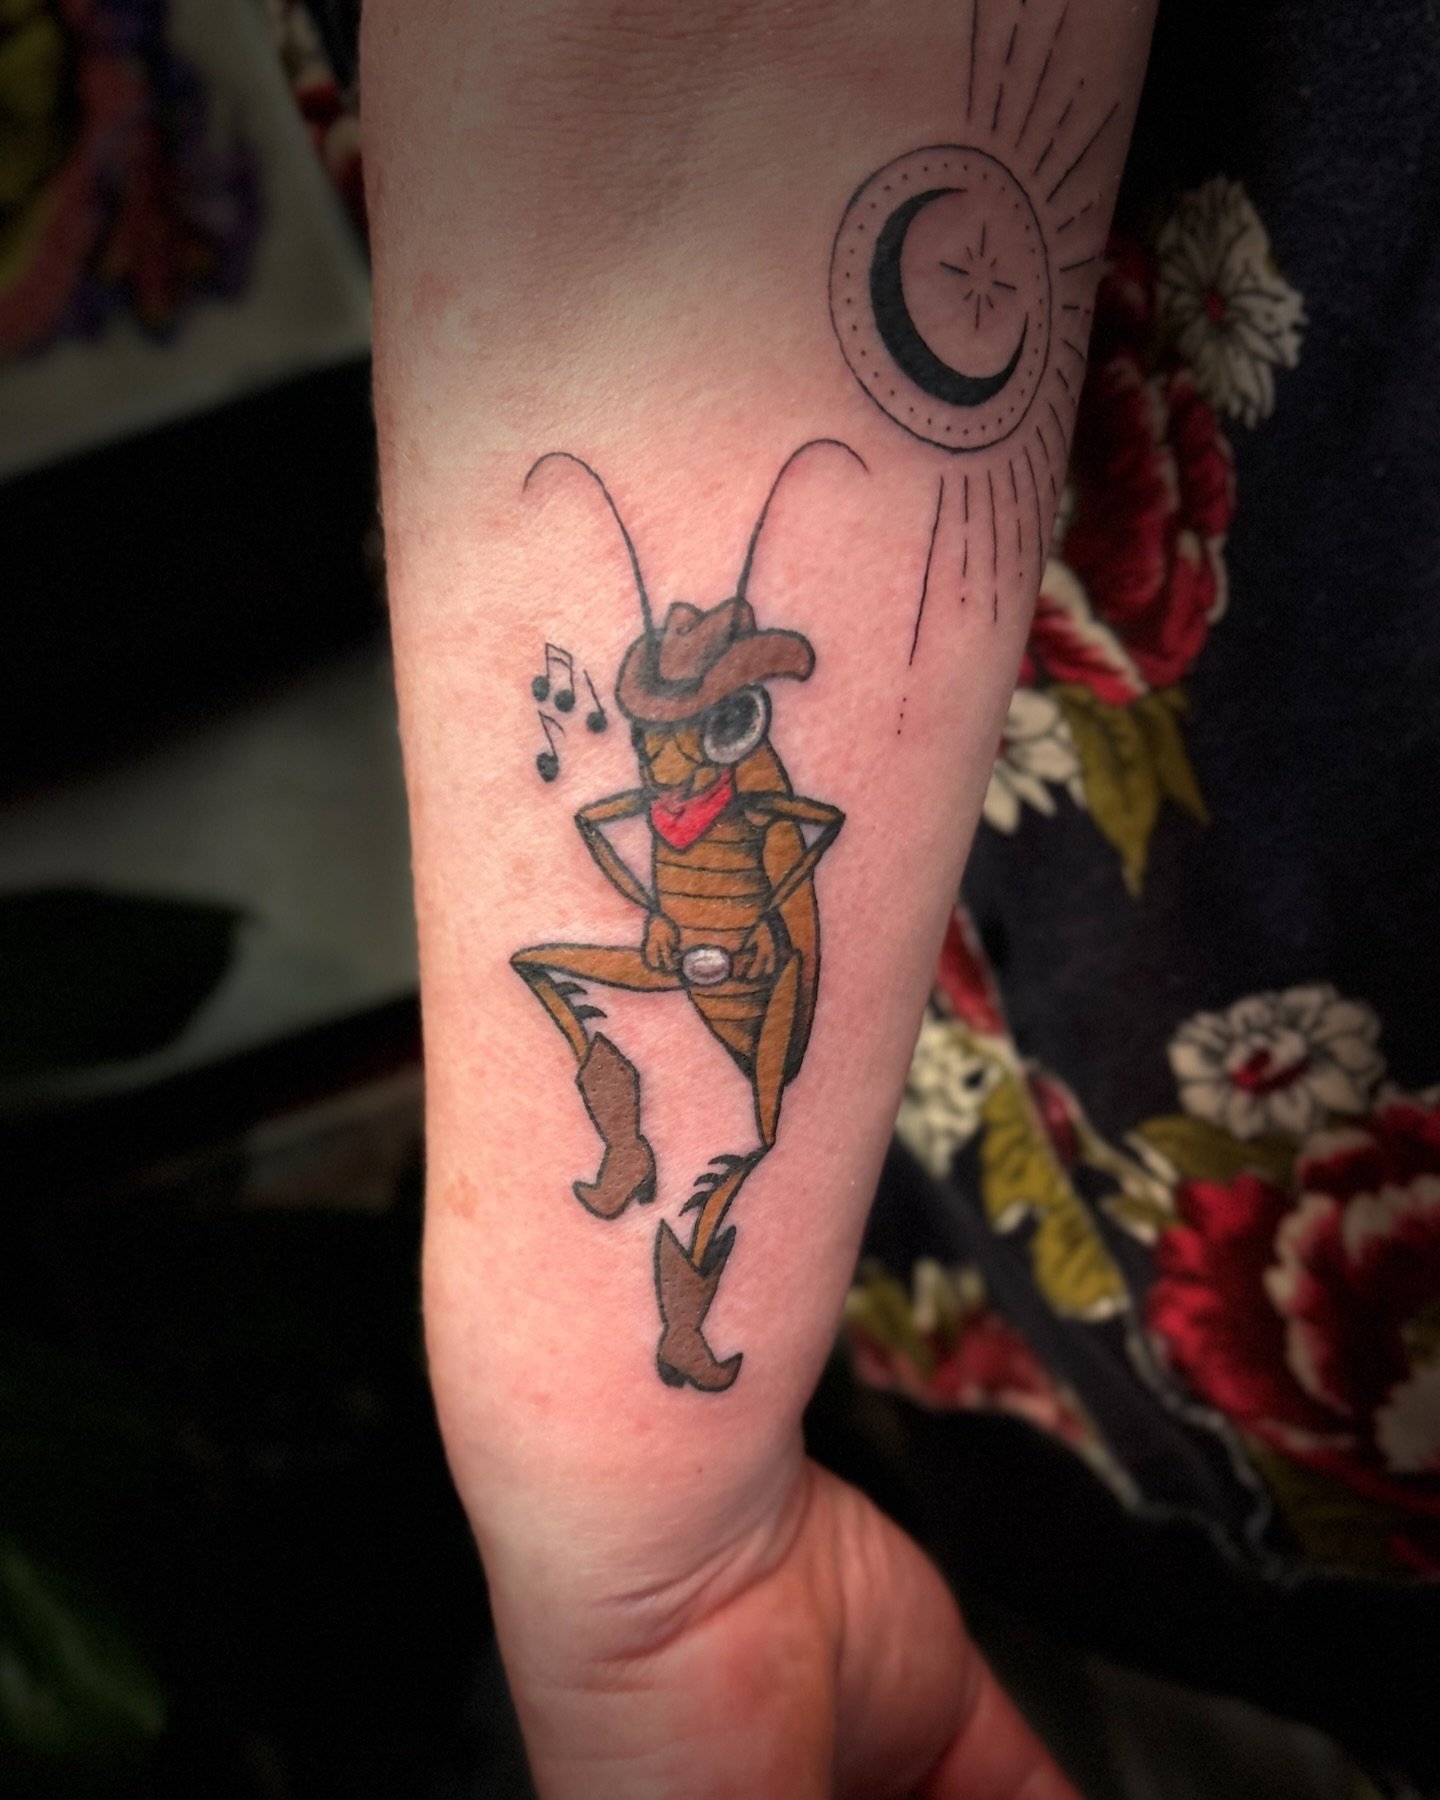 Boot scooting&rsquo; buggy 🪳🎶
Little line dancing roach from my flash with a little sun/moon adornment for Laura! Thanks so much, it&rsquo;s always a joy tattooing you.

#cocroach #rodeoroach #rootintootinroach #cowboy #cowboyboots #linedance #newb